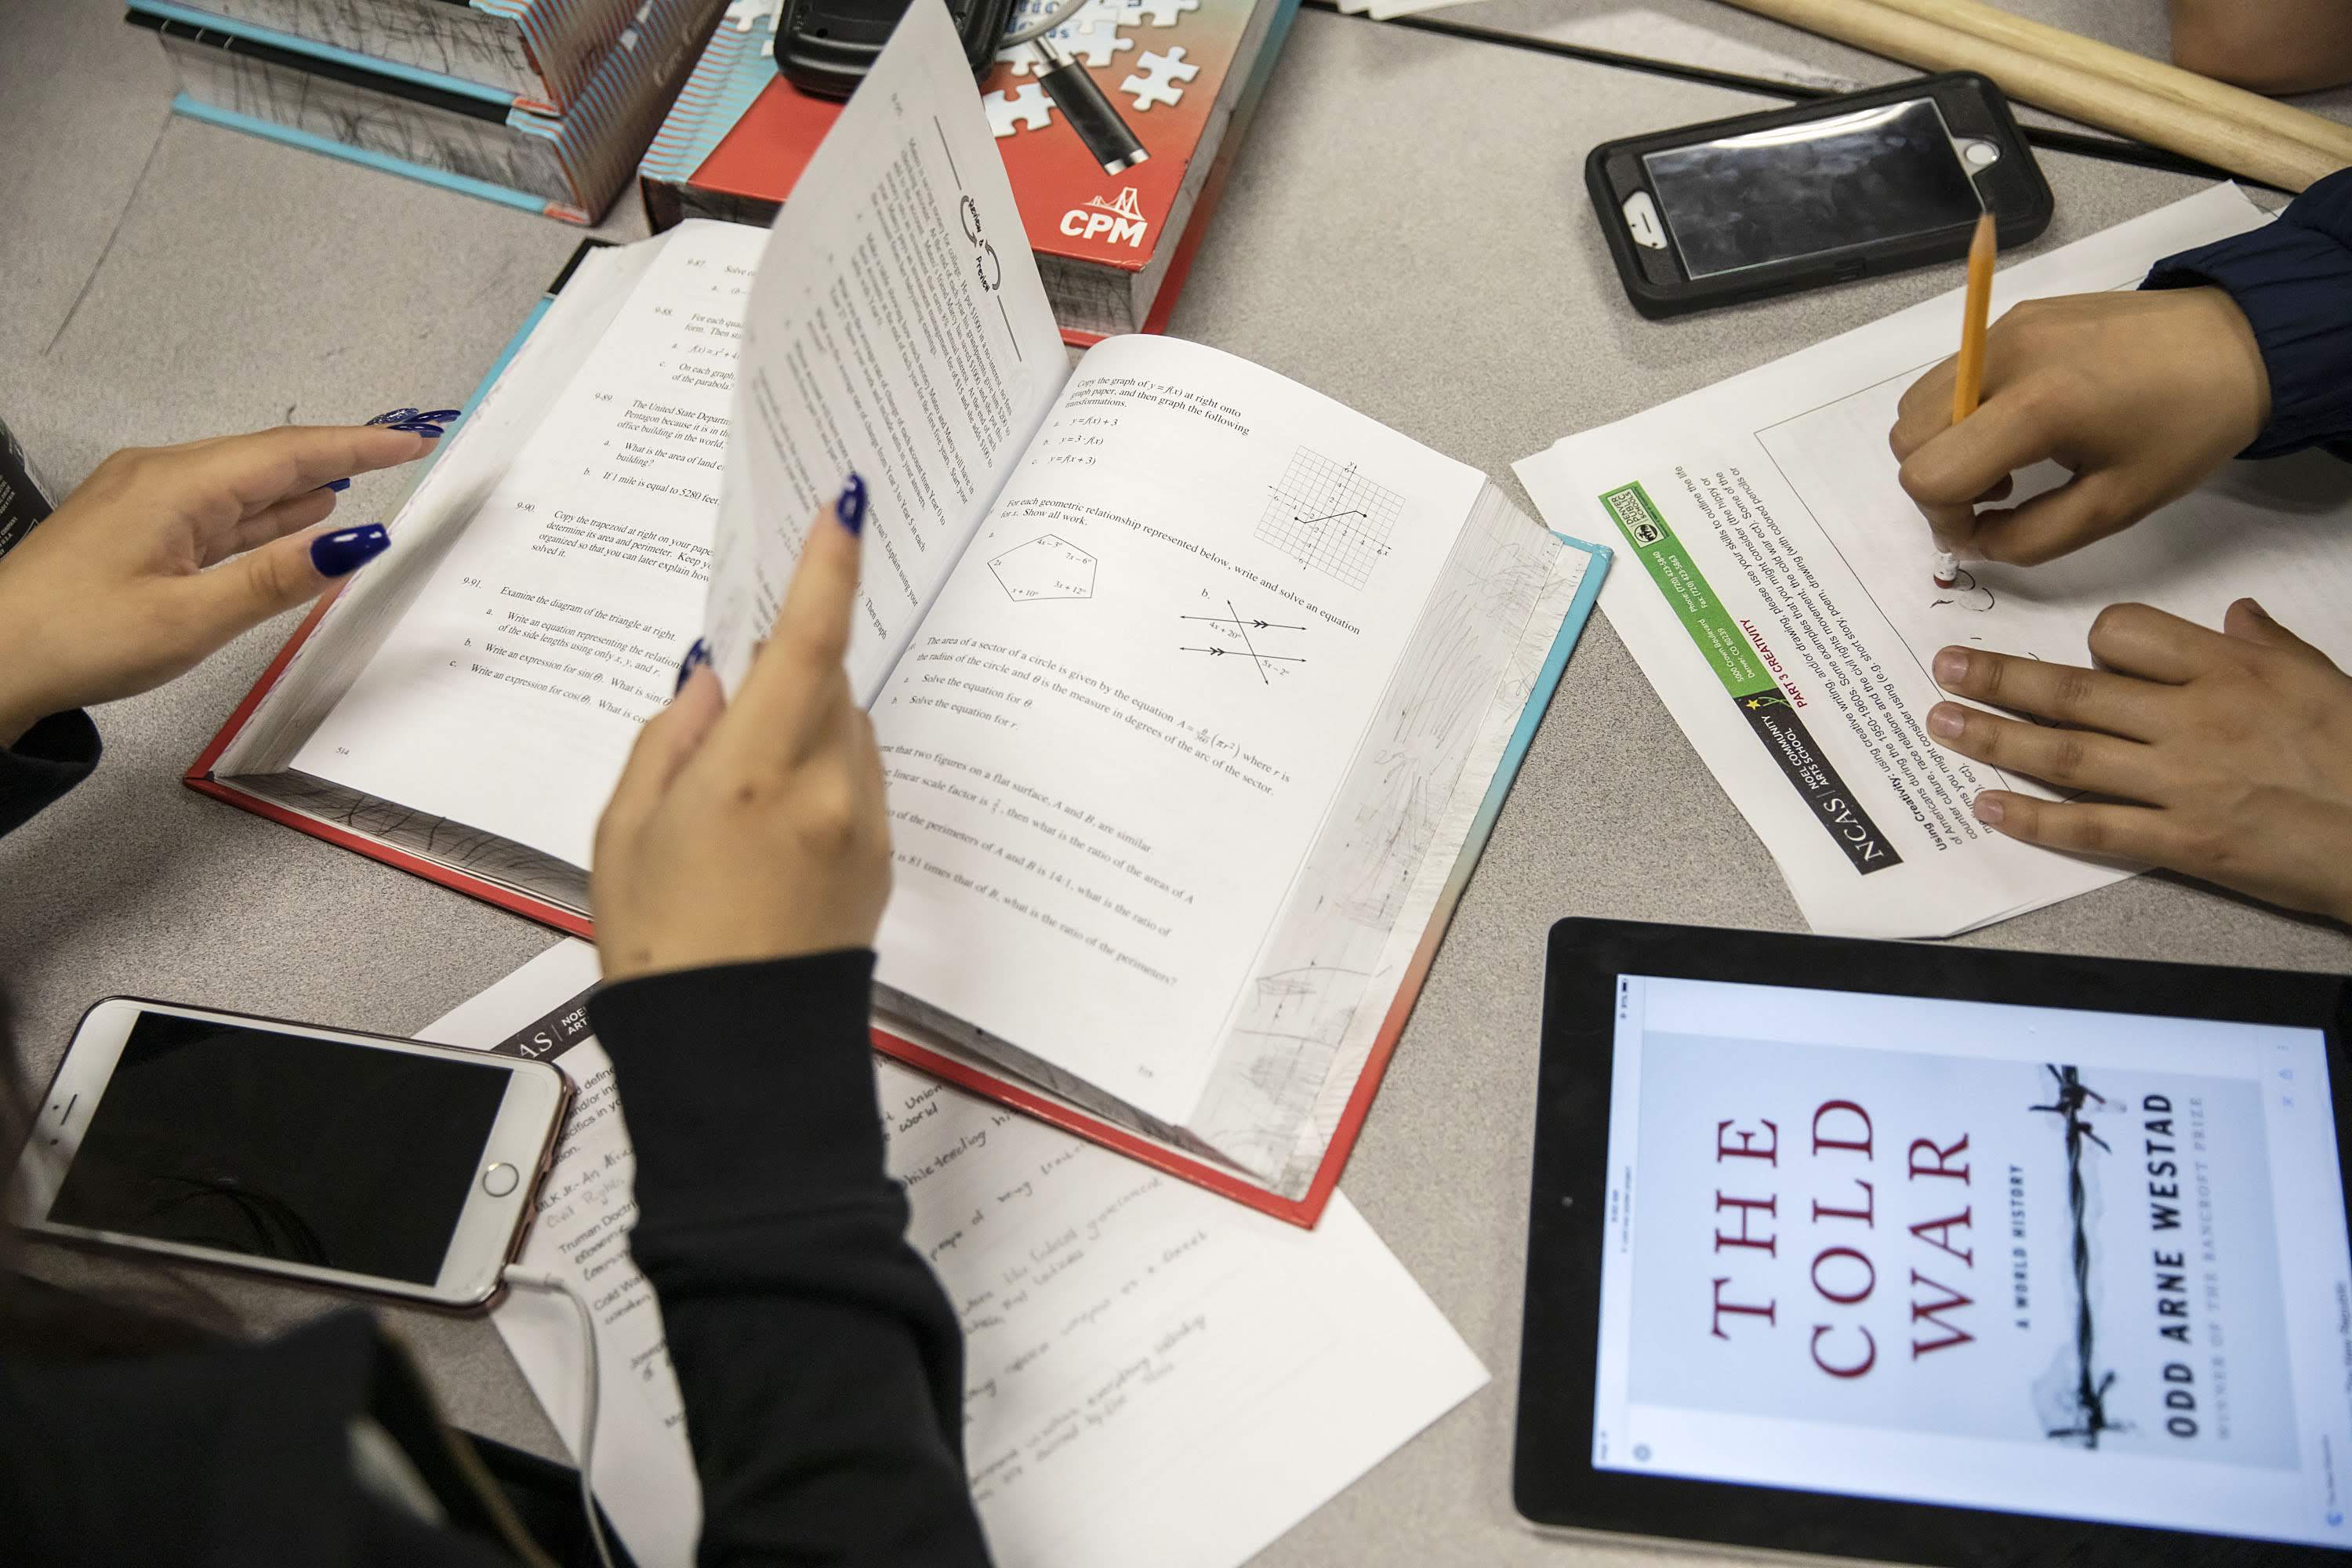 Hands of a student with black fingernail polish turn the pages of a math book, with an iPhone nearby. At the same table, the hands of another student erase a mark on a worksheet, with a tablet device depicting a book or lesson, “The Cold War,” nearby.